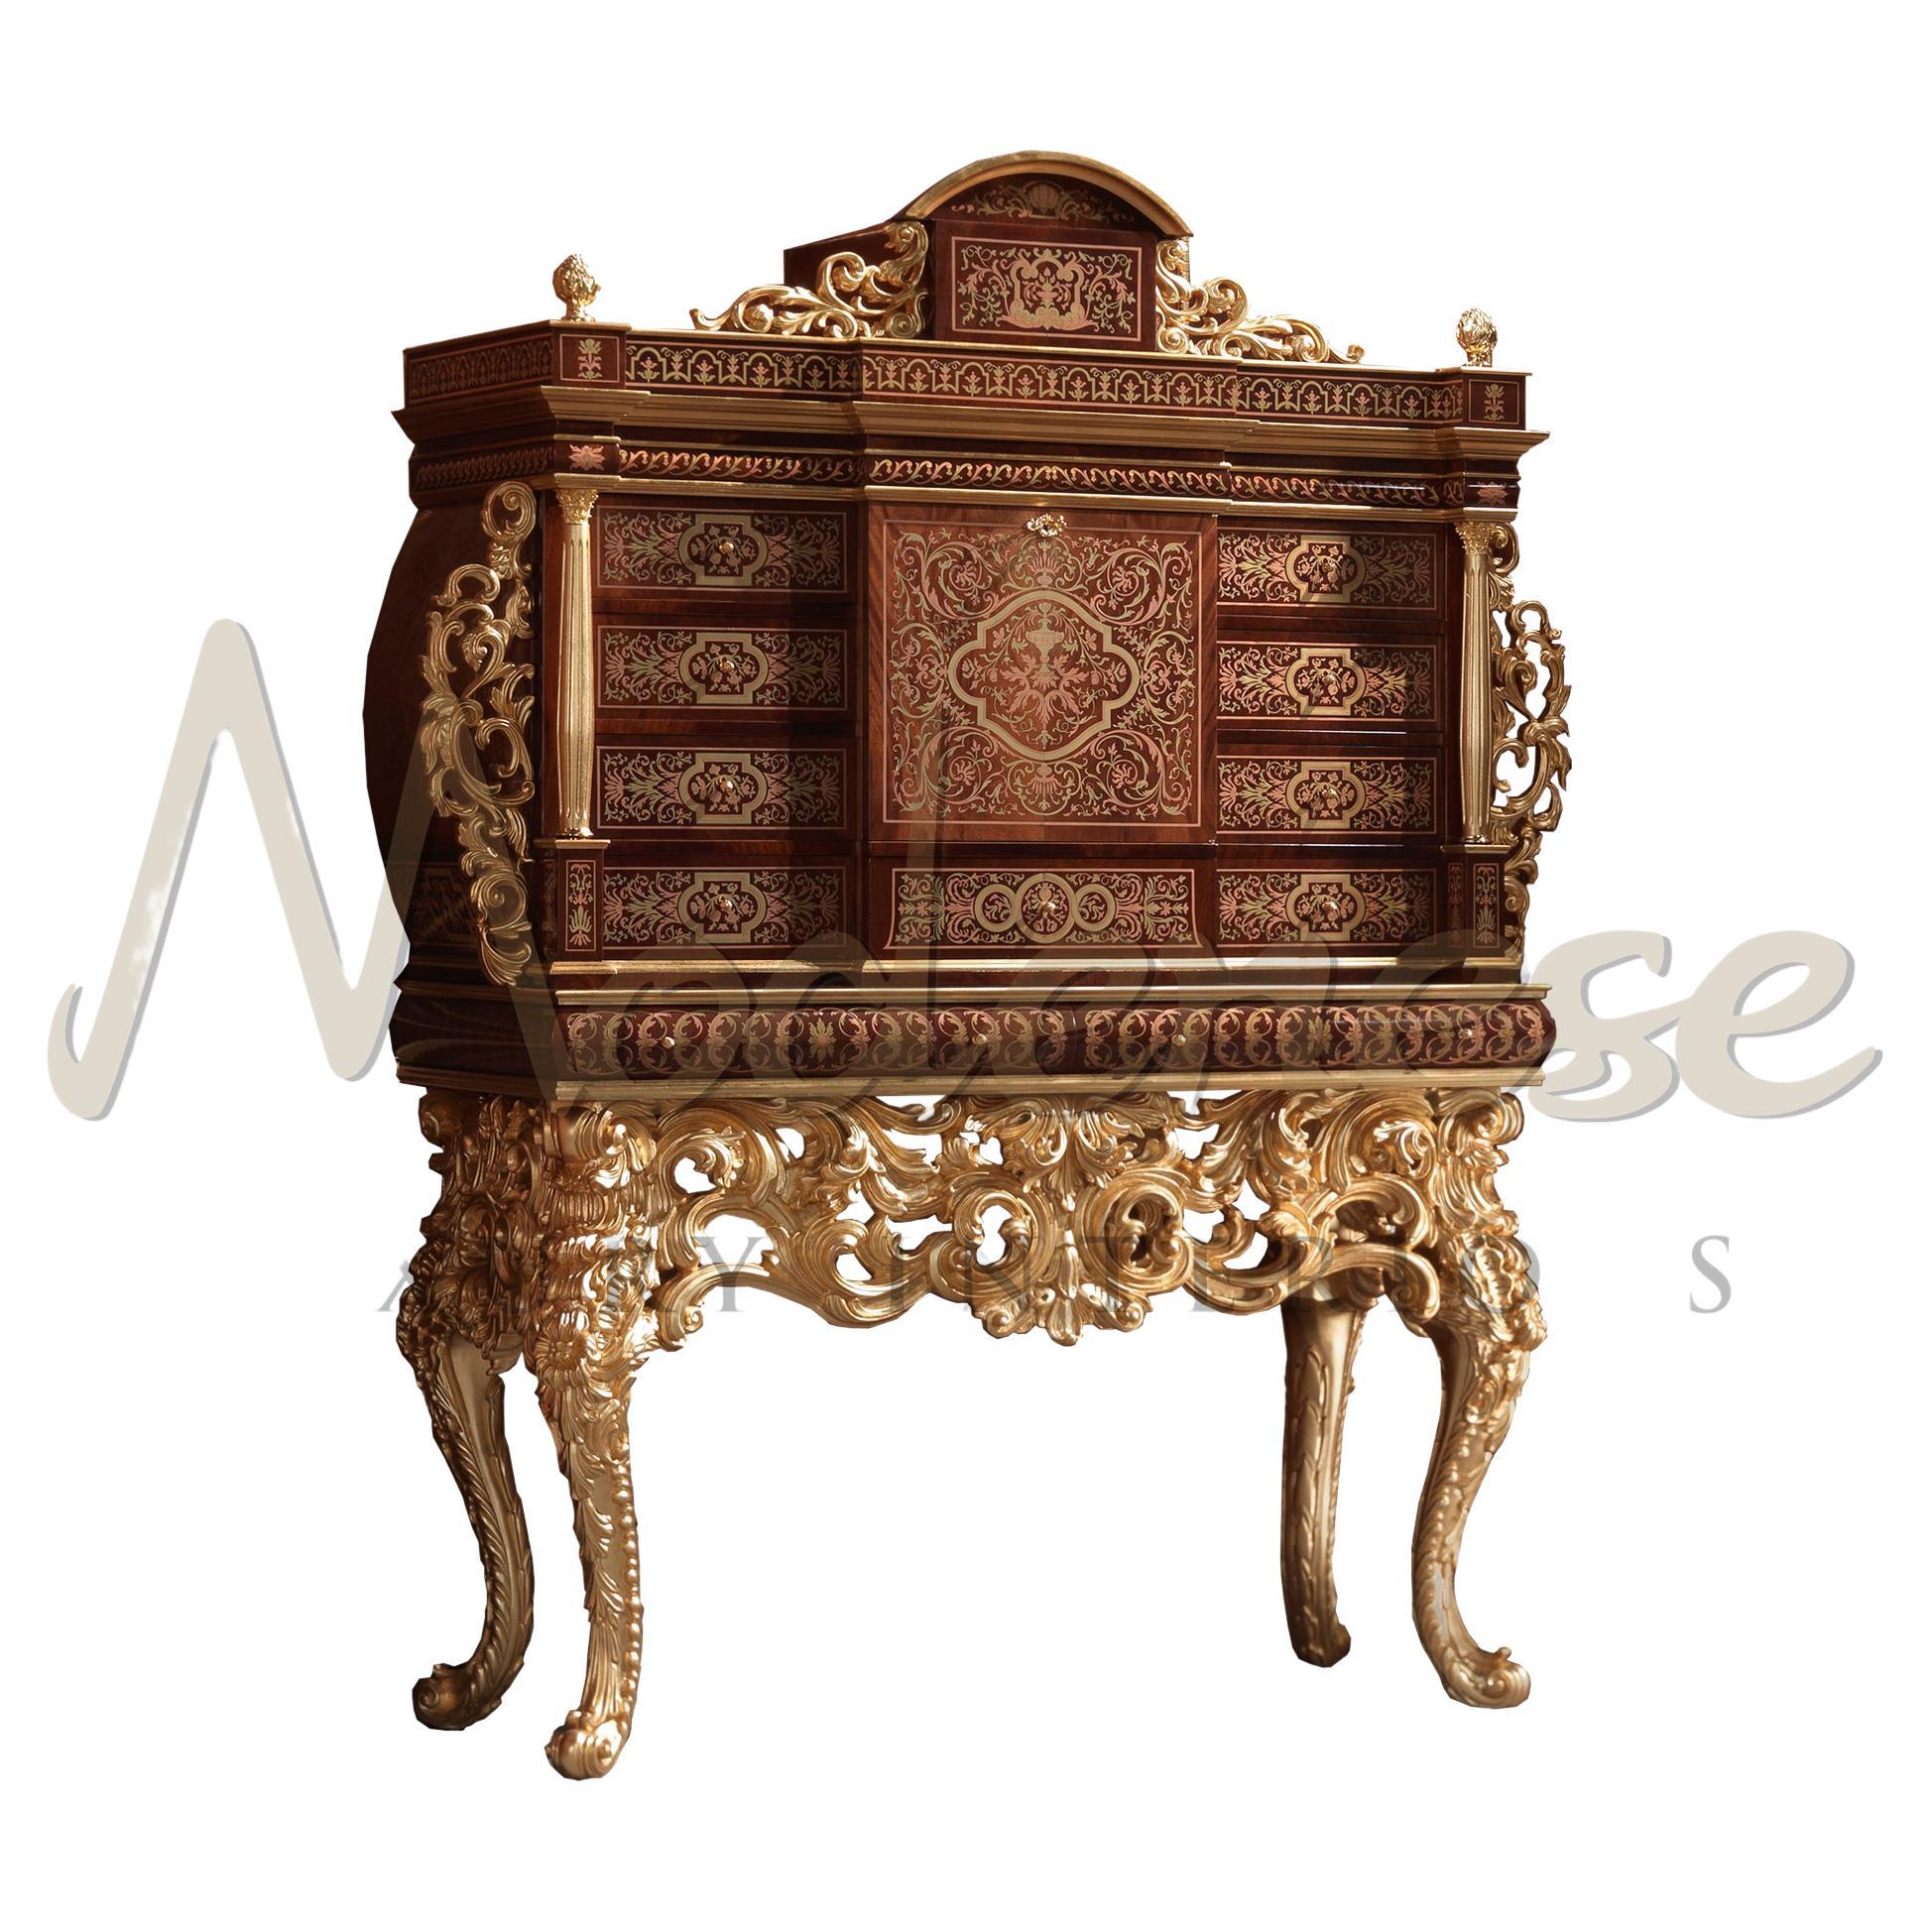 Appliqué 21st Century Wooden Cigar Cabinet with Baroque Carvings, Handpainted, Gold Leaf For Sale